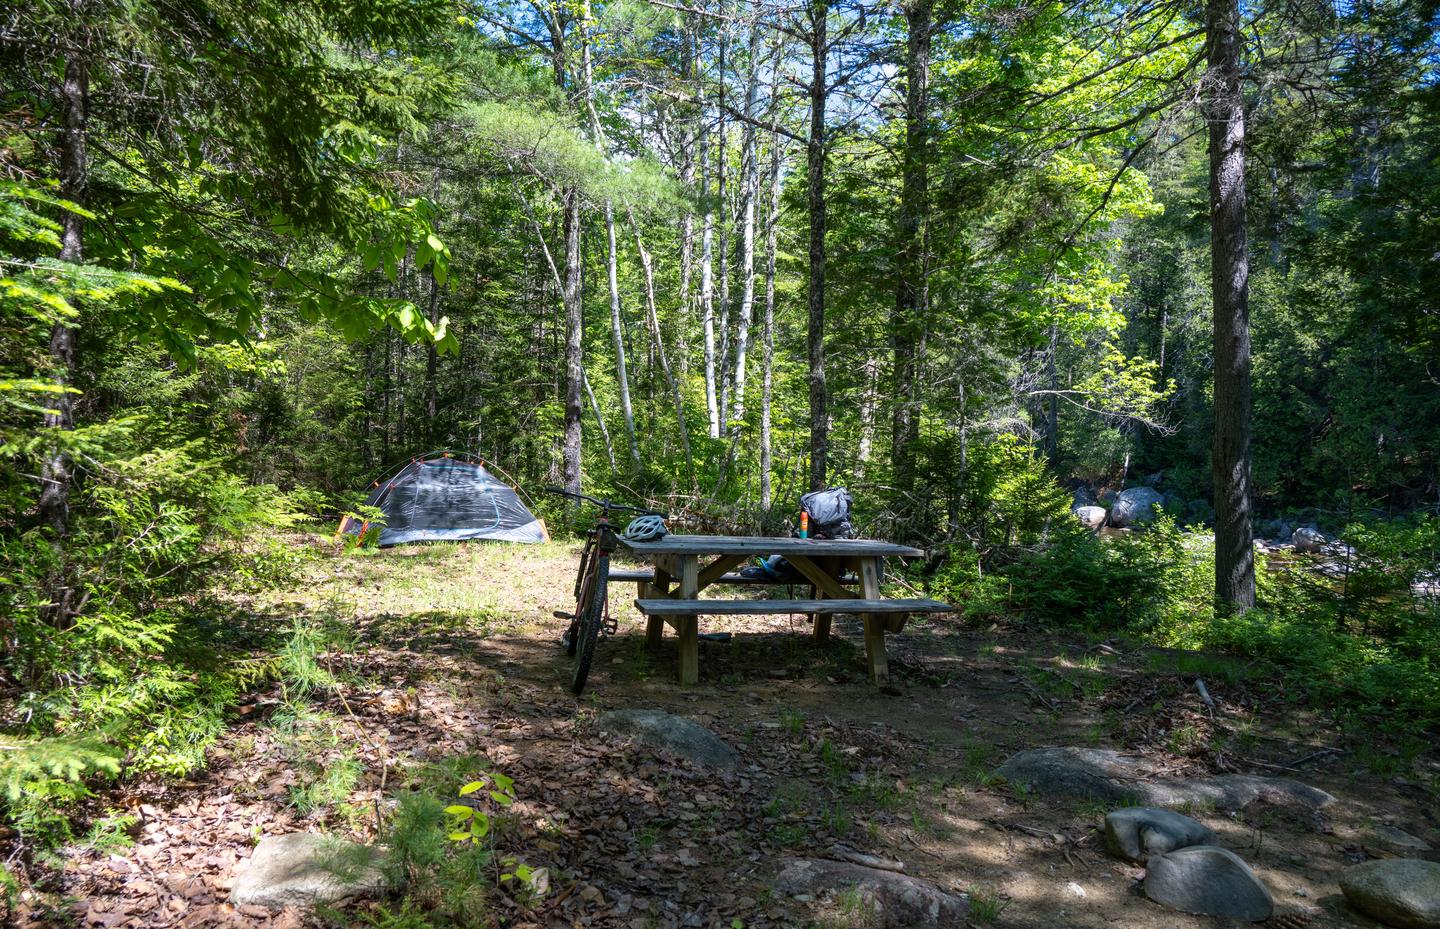 Esker Campsite with a two person tent set up in the back where there is a leveled grassy area for a tent. A picnic table is in the shade in front, closer to the trail.Esker Campsite is a remote campsite next to Wassataquoik Stream.